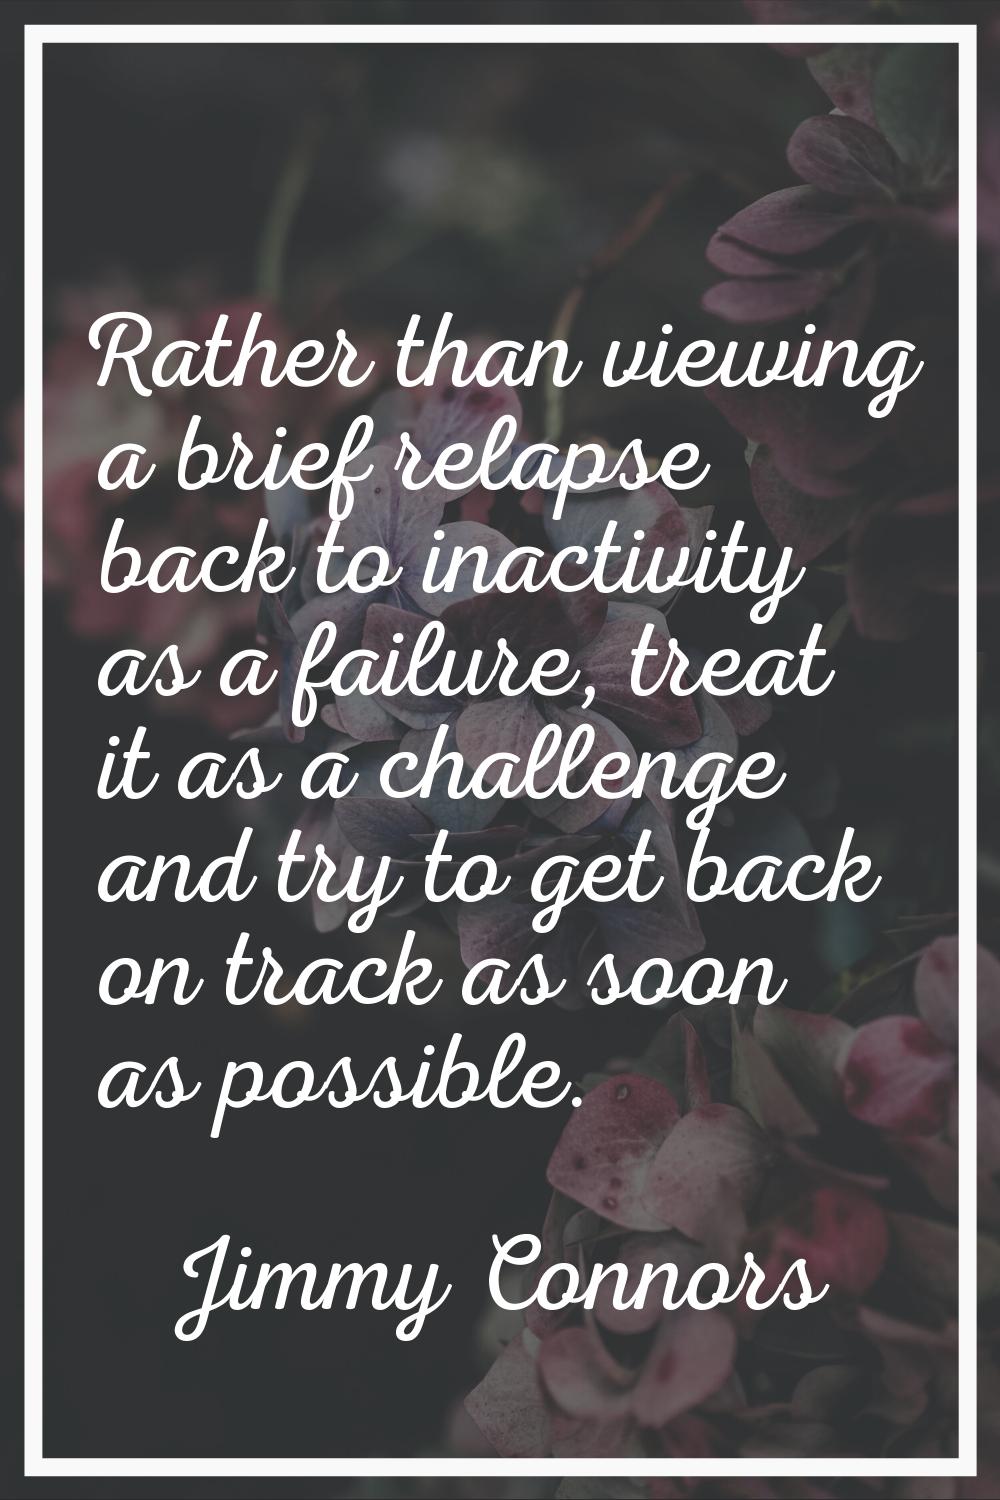 Rather than viewing a brief relapse back to inactivity as a failure, treat it as a challenge and tr